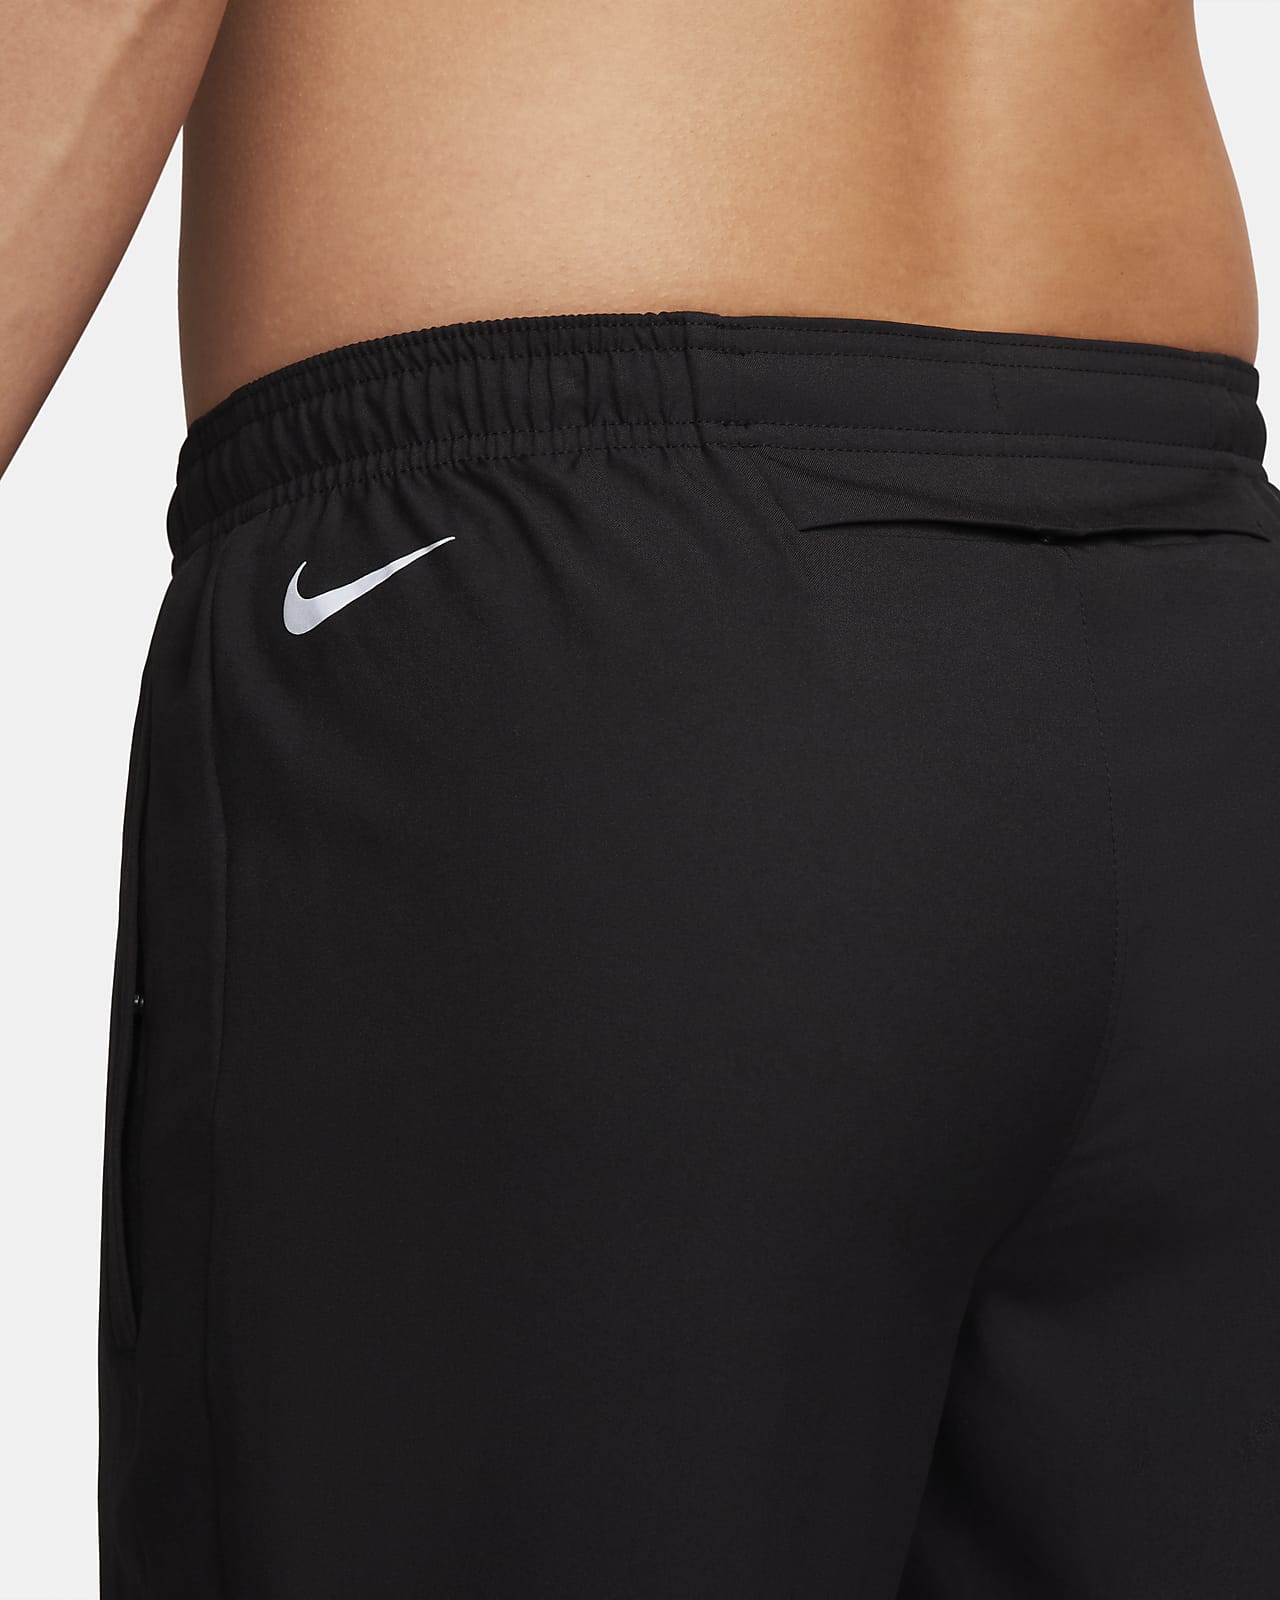 Nike Dri-FIT Run Division Challenger Woven Running Pants Men - faded  spruce/reflective silver DV9267-309